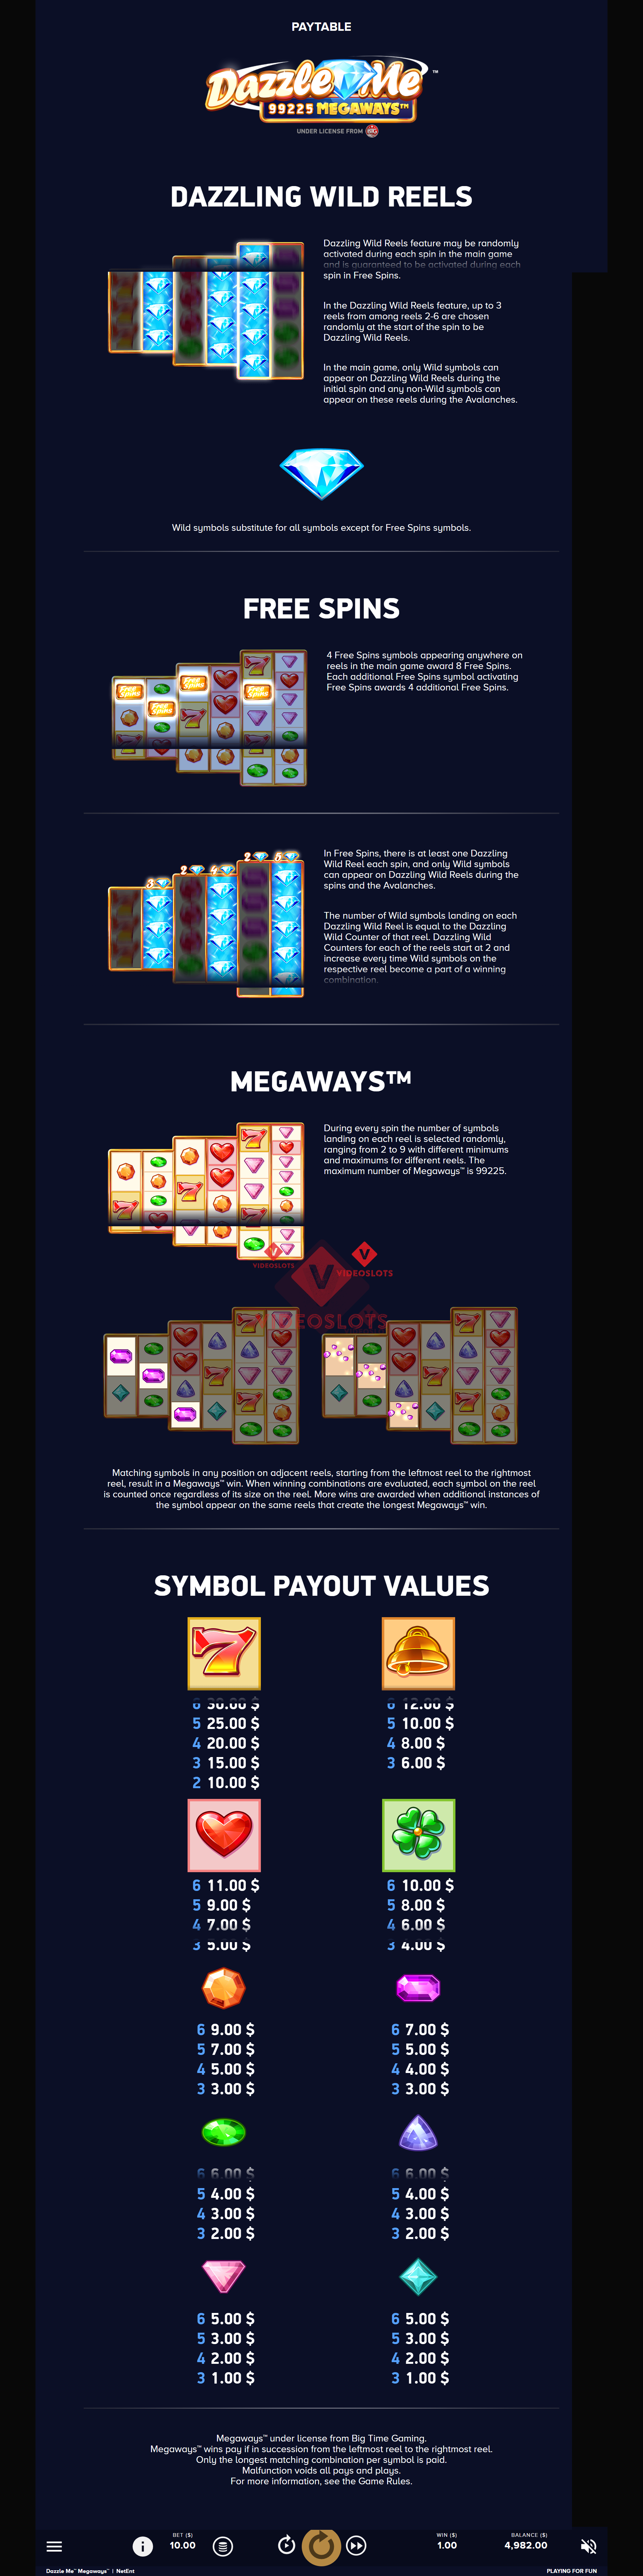 Pay Table for Dazzle Me Megaways slot from NetEnt